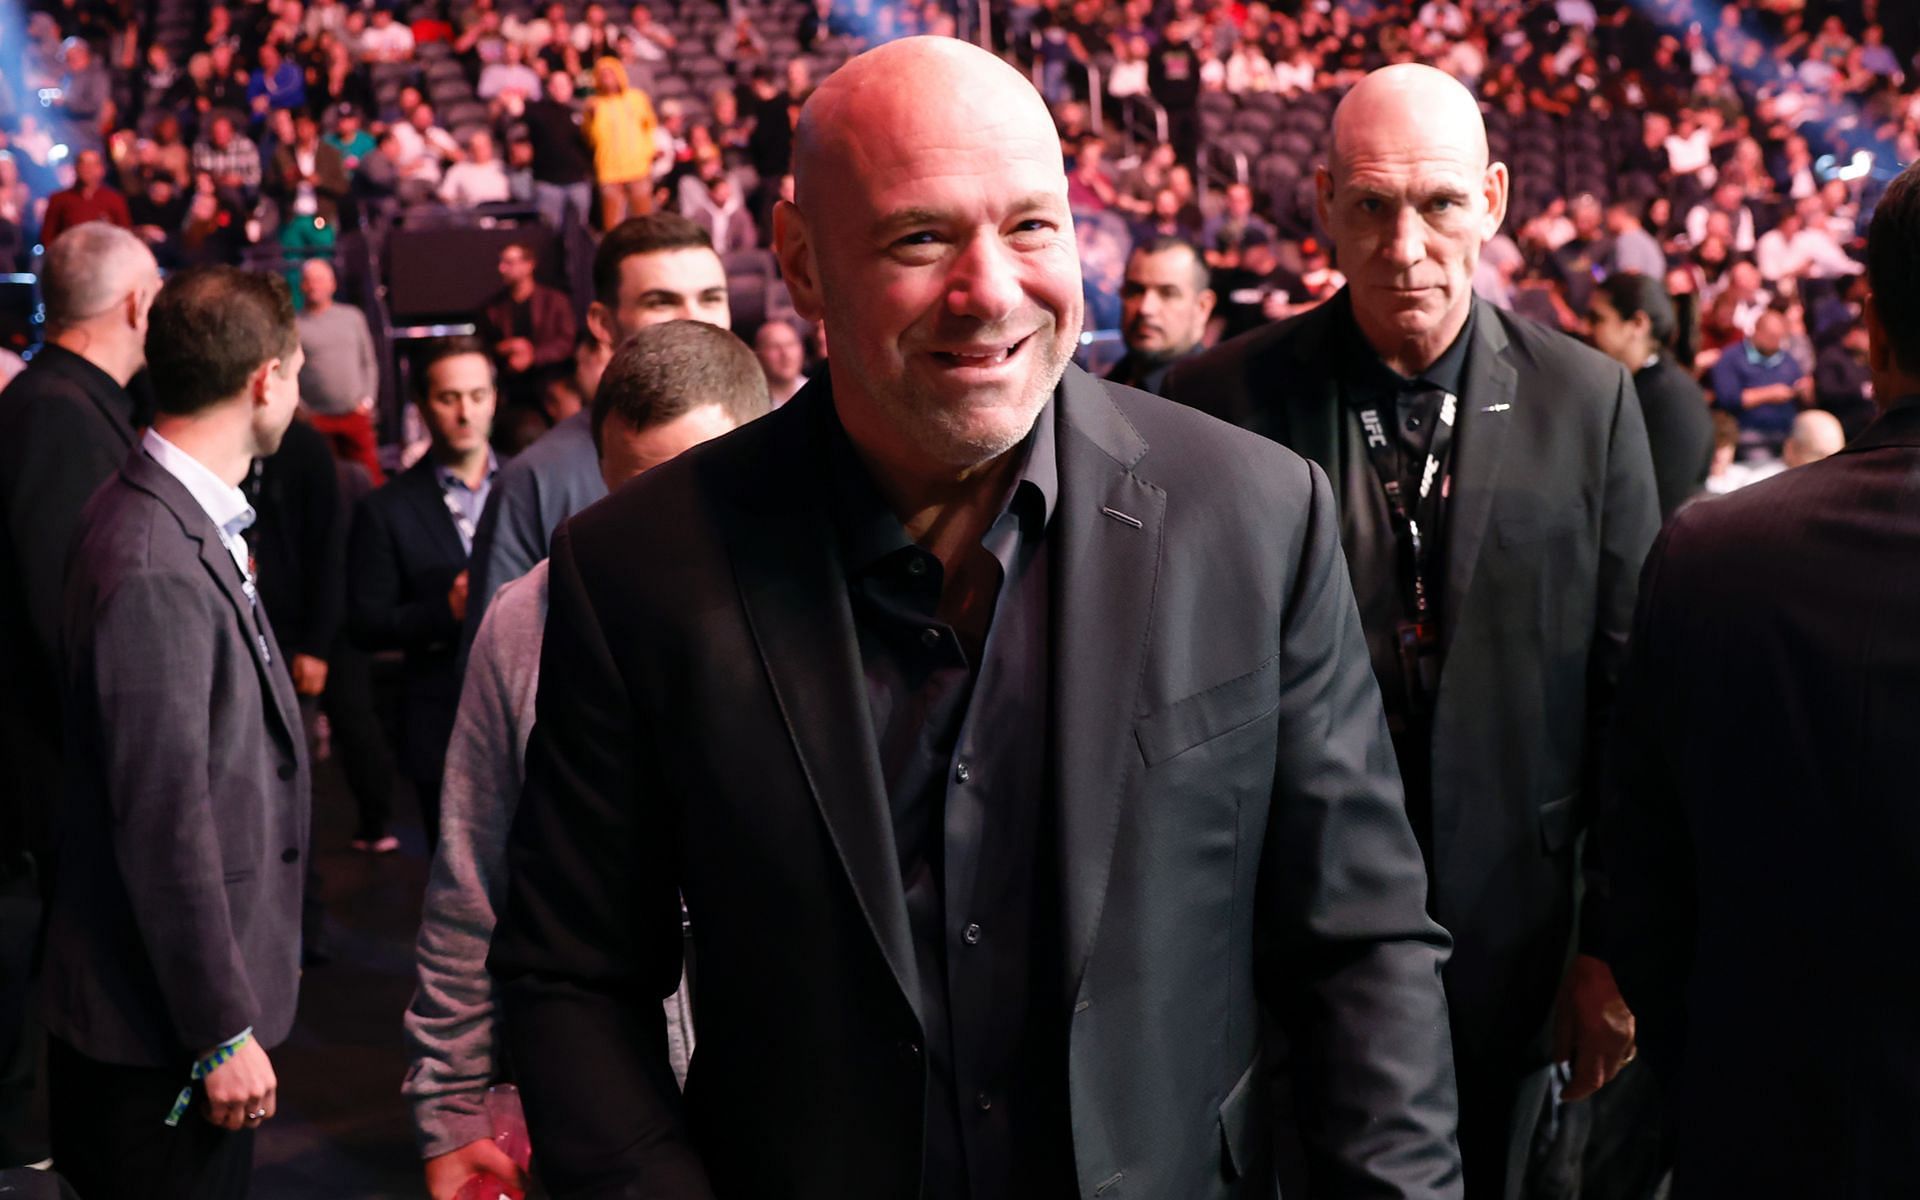 TKO Group Holdings starts the year on a strong note financially despite UFC